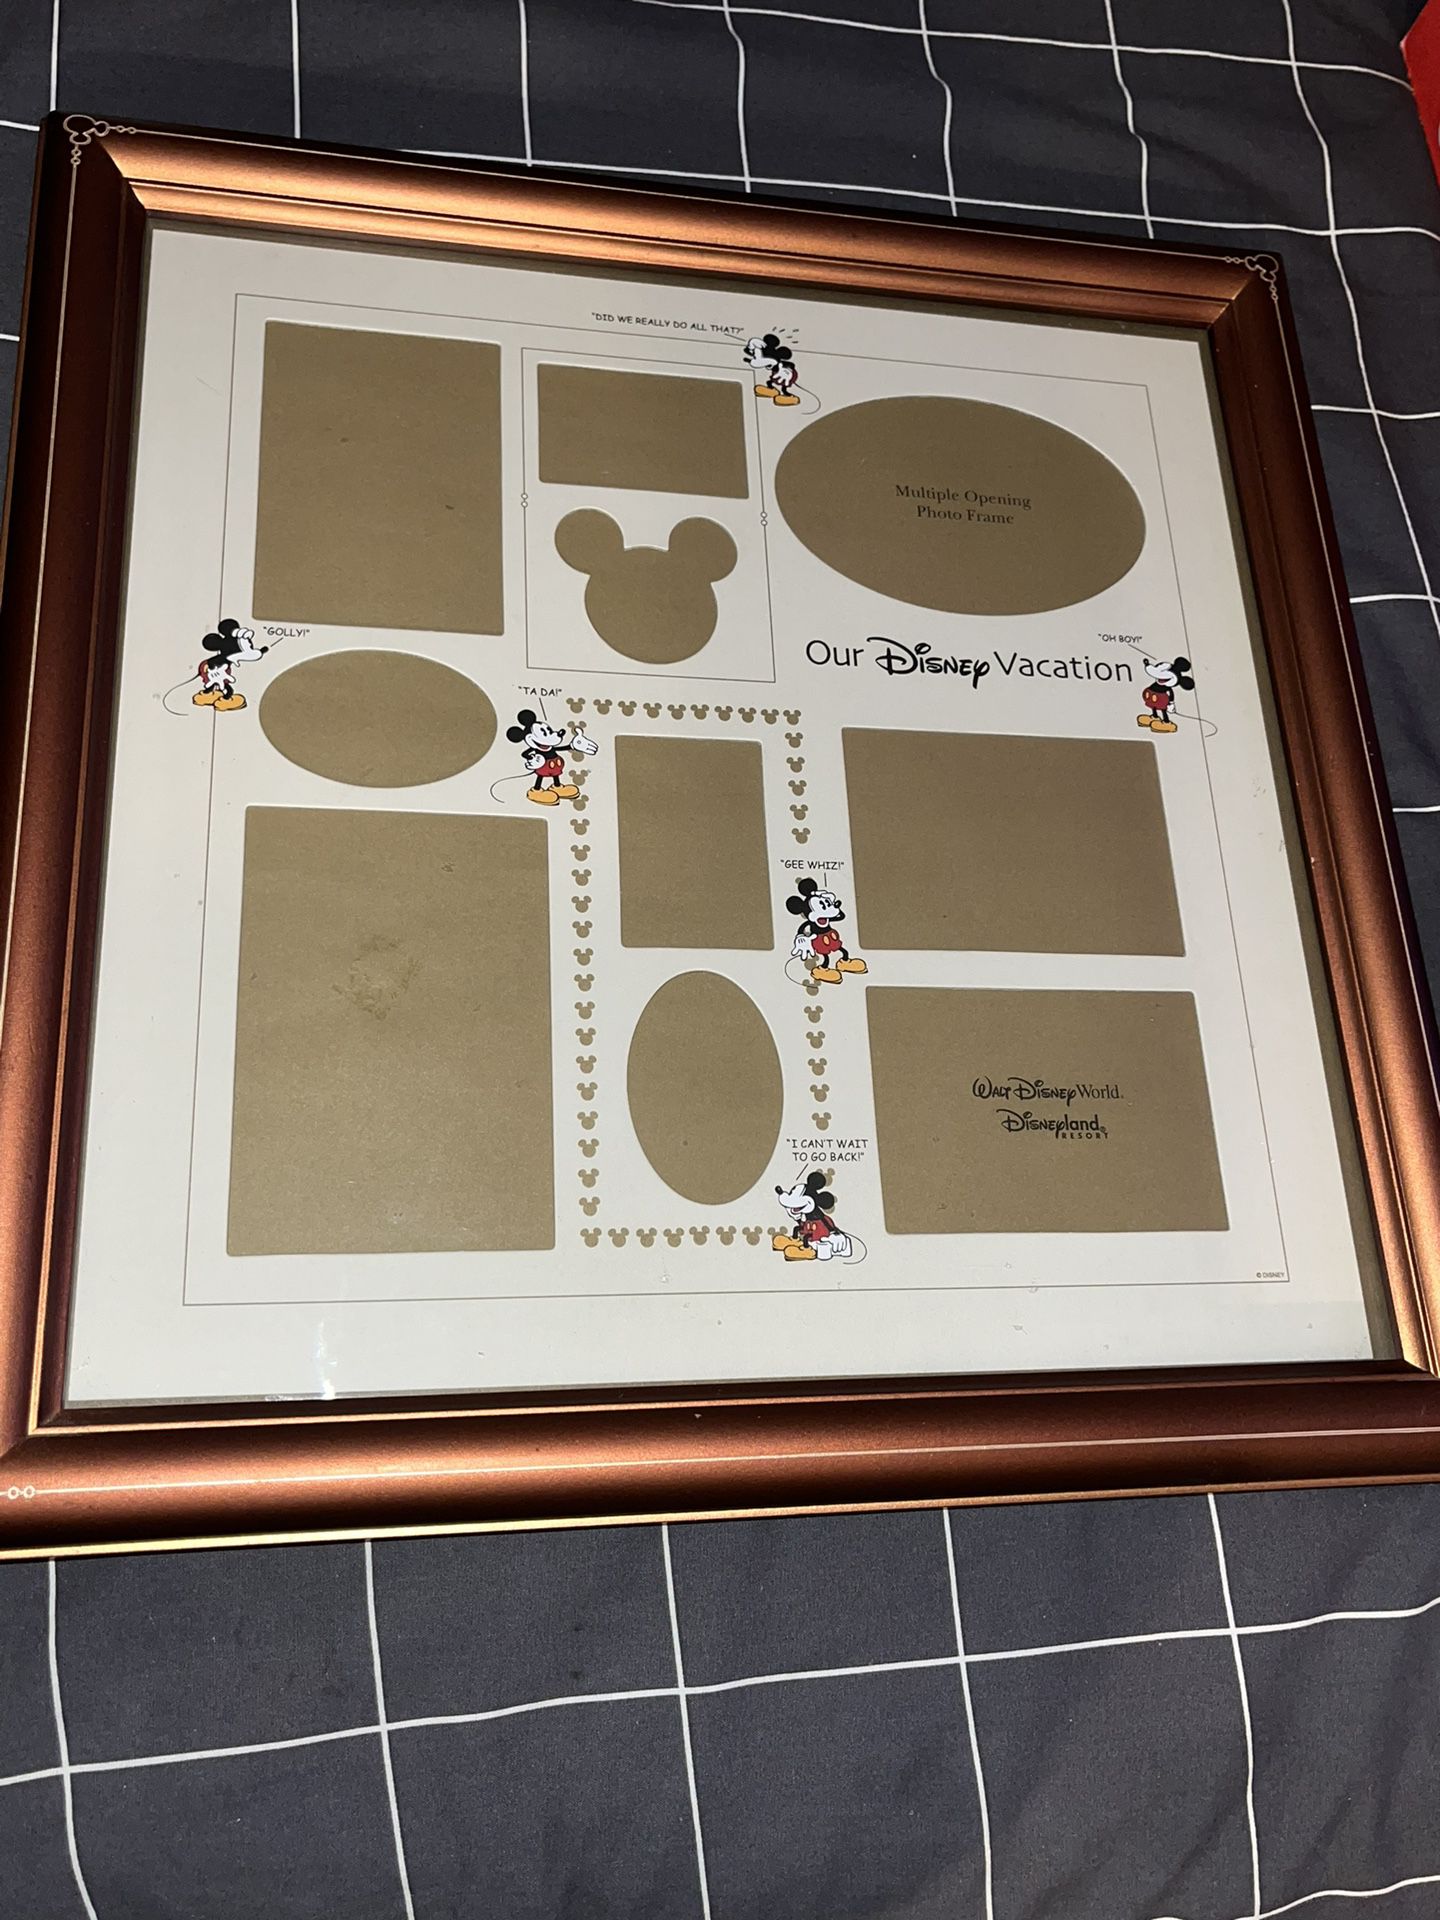 DISNEY FRAME COLLAGE PICTURE FRAME PHOTO MICKEY MOUSE